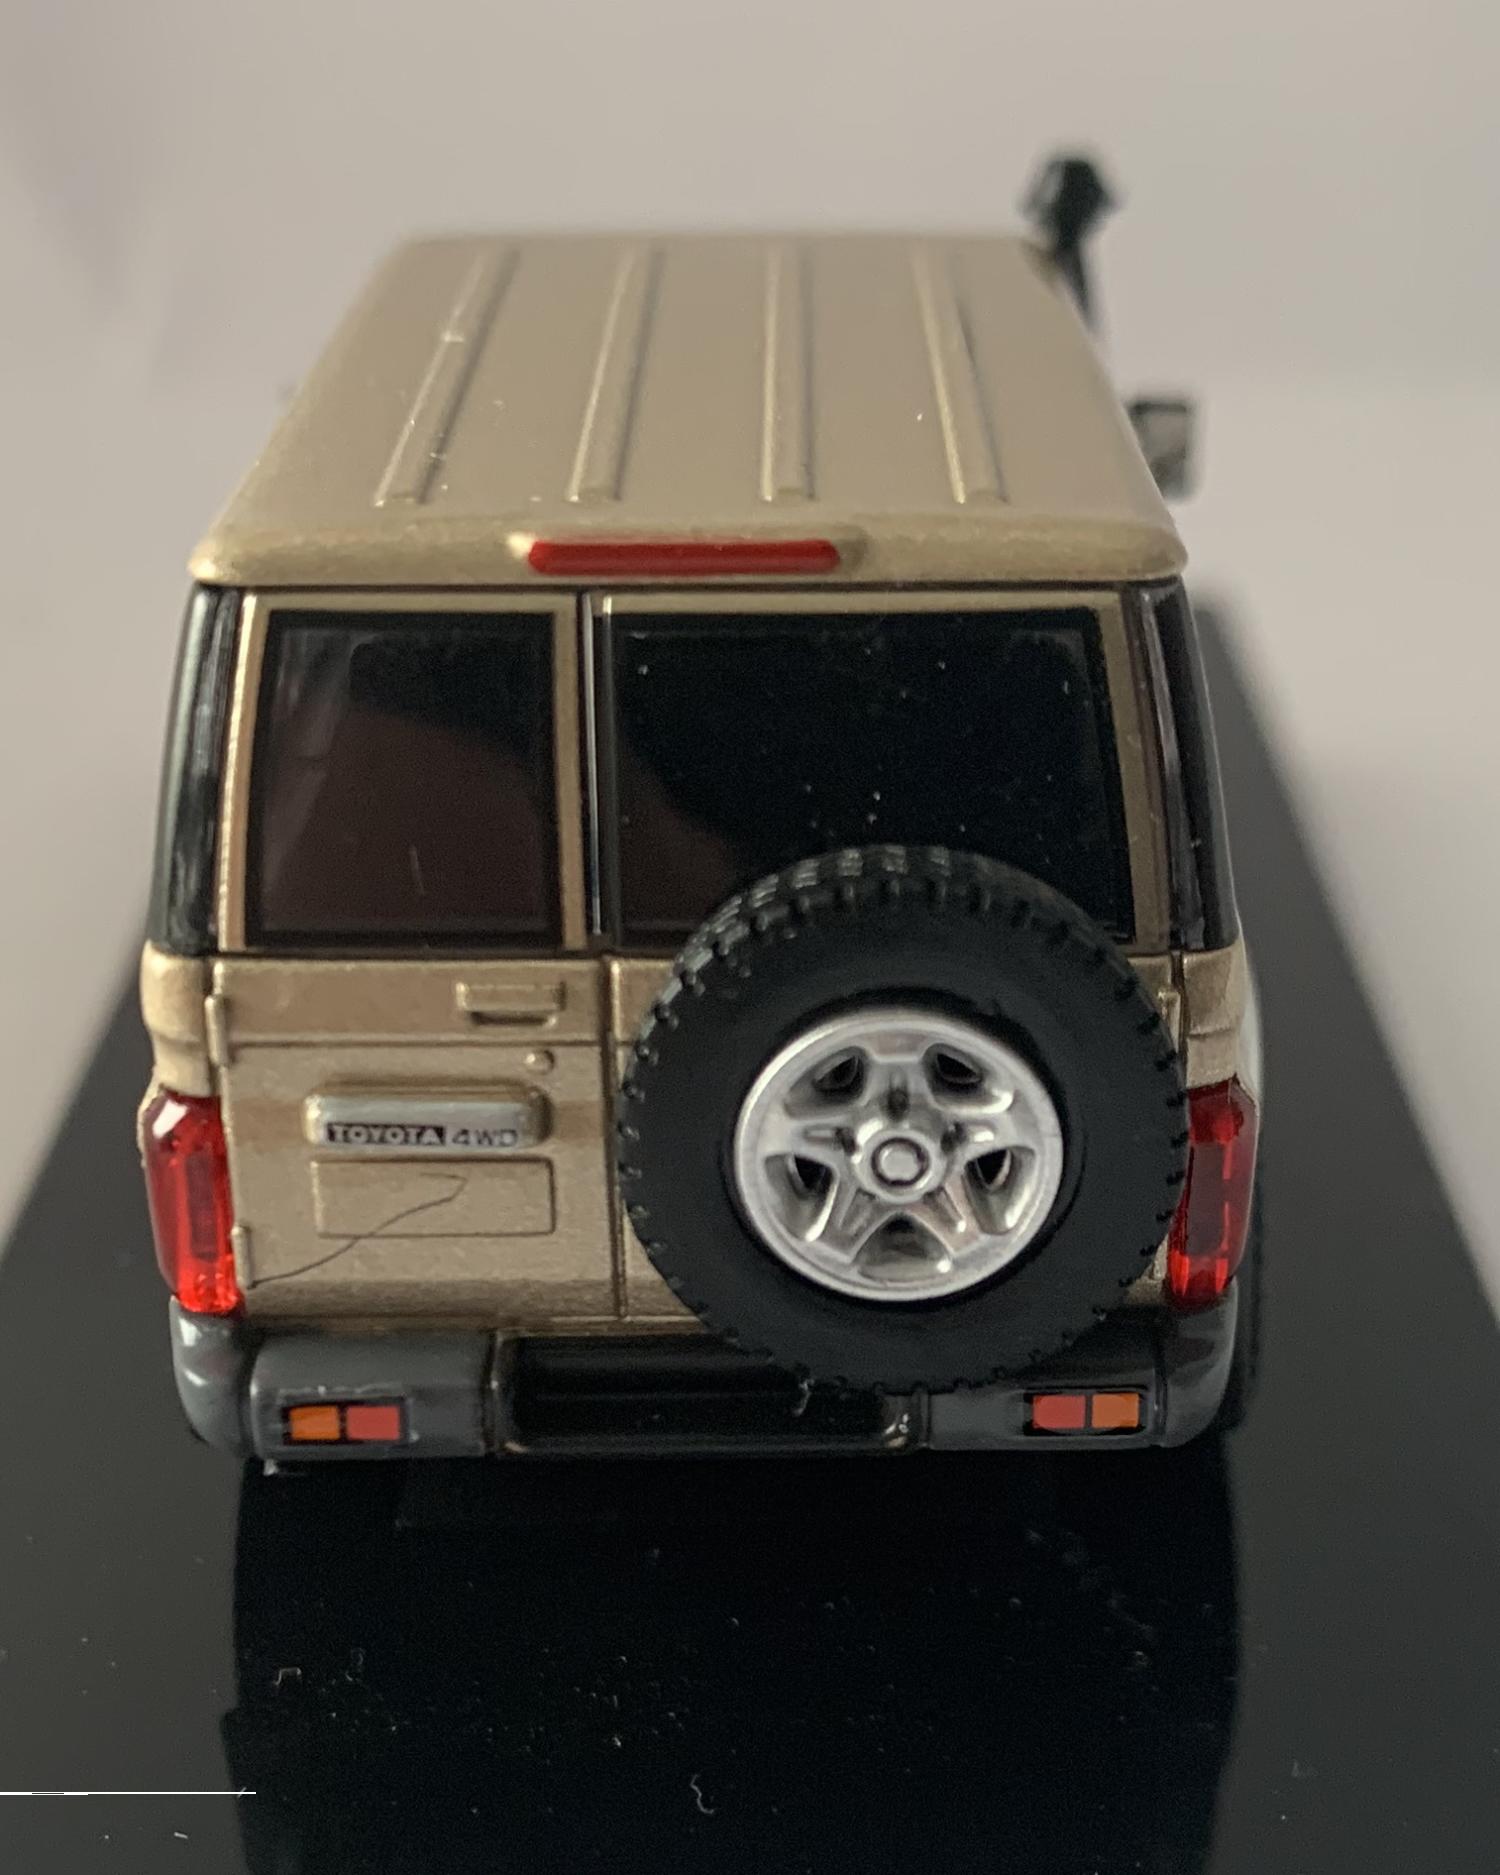 An excellent scale model of a Toyota Land Cruiser decorated in vintage gold with silver wheels, spare wheel (not removable) on rear door and snorkel.